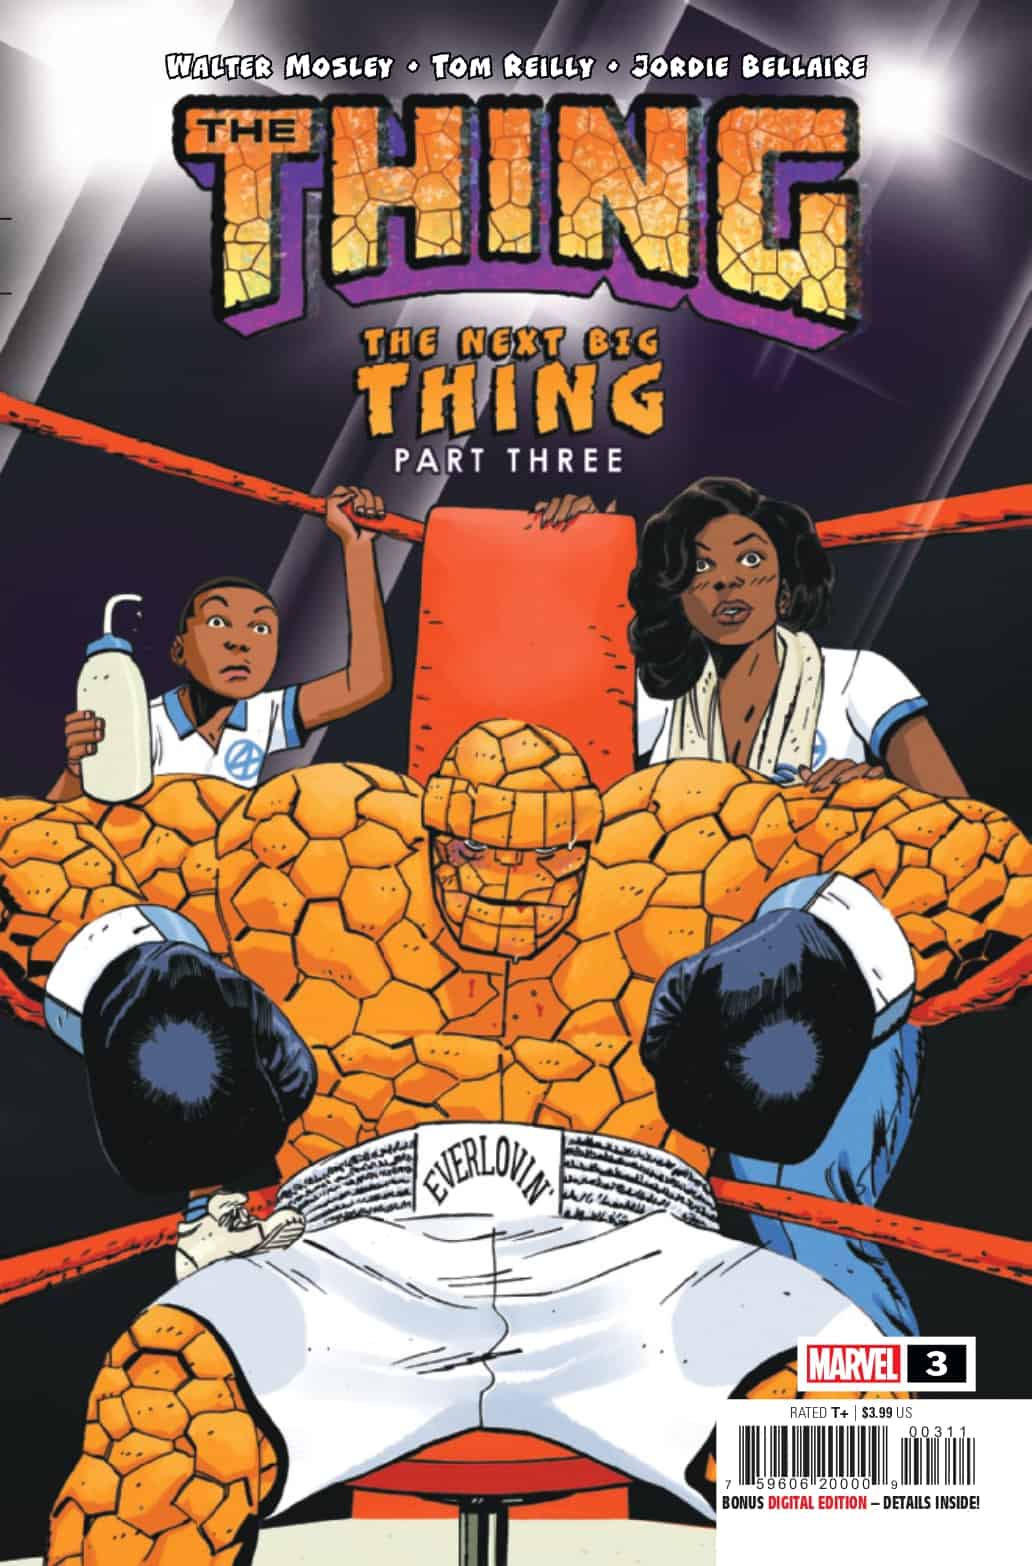 SNEAK PEEK: Preview of Marvel's THE THING #3 (On Sale 1/12!) - Comic Watch